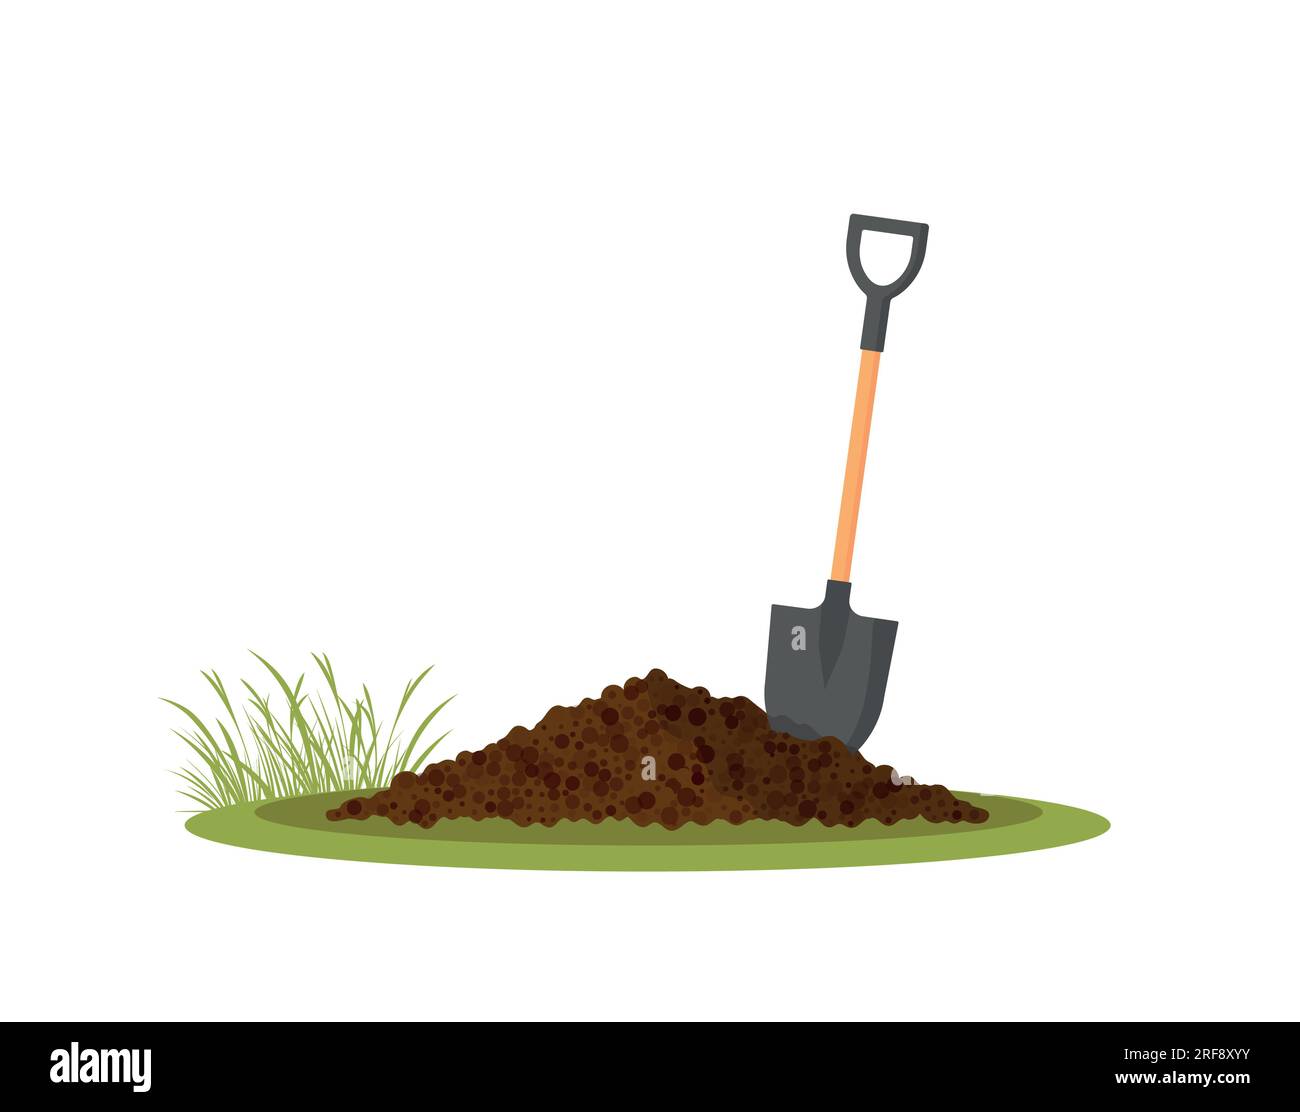 Spade stuck in the soil Cut Out Stock Images & Pictures - Alamy